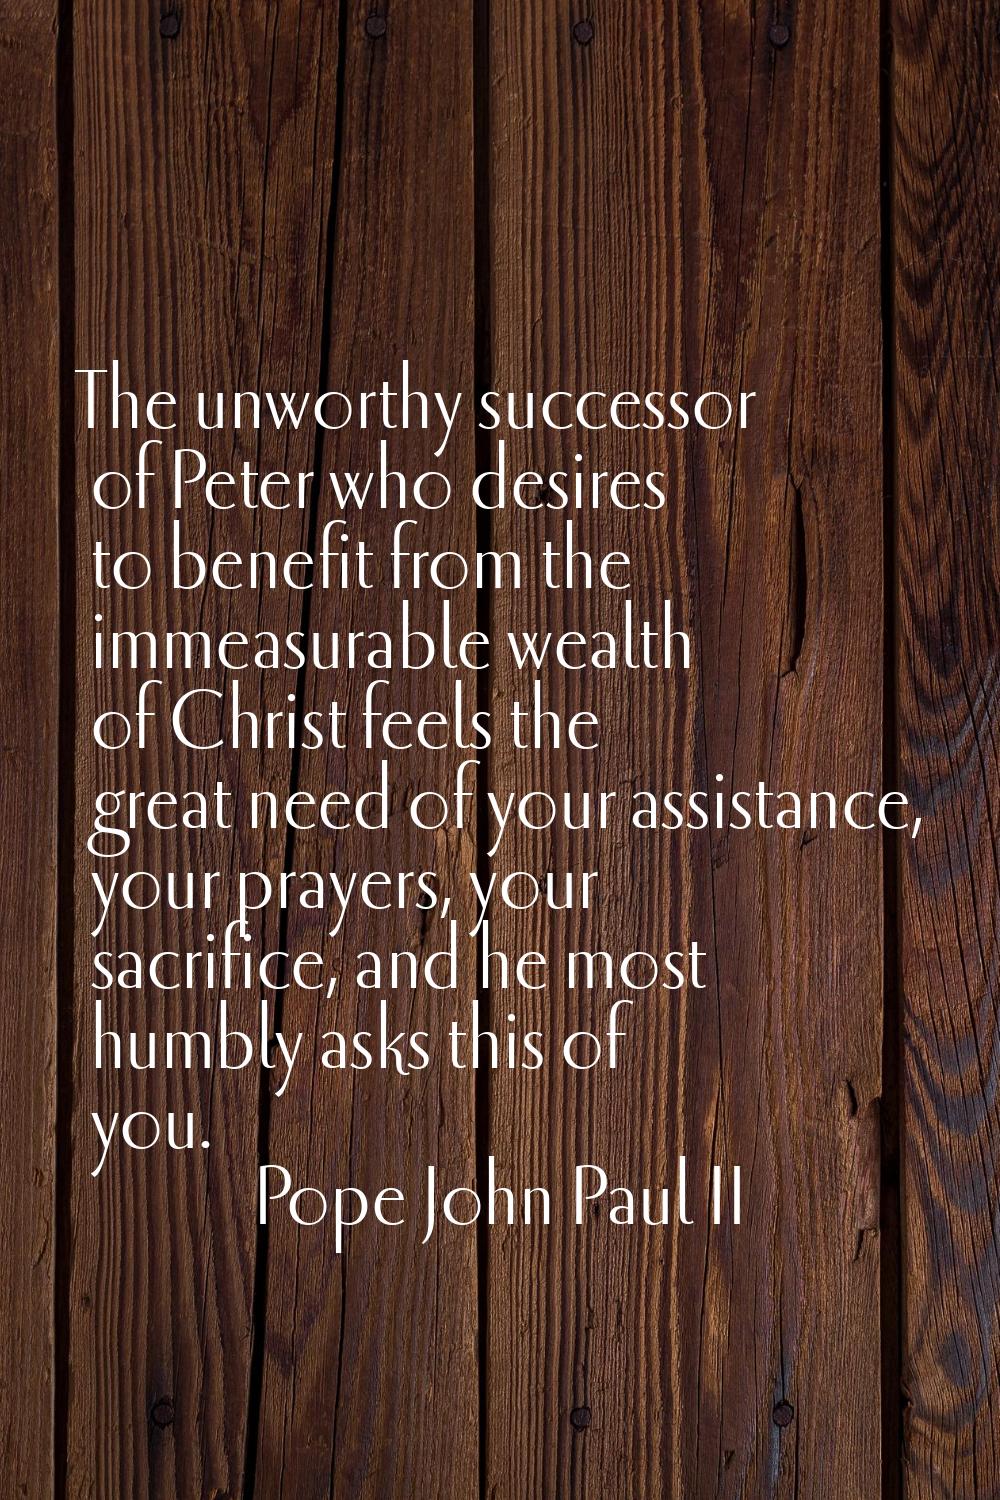 The unworthy successor of Peter who desires to benefit from the immeasurable wealth of Christ feels